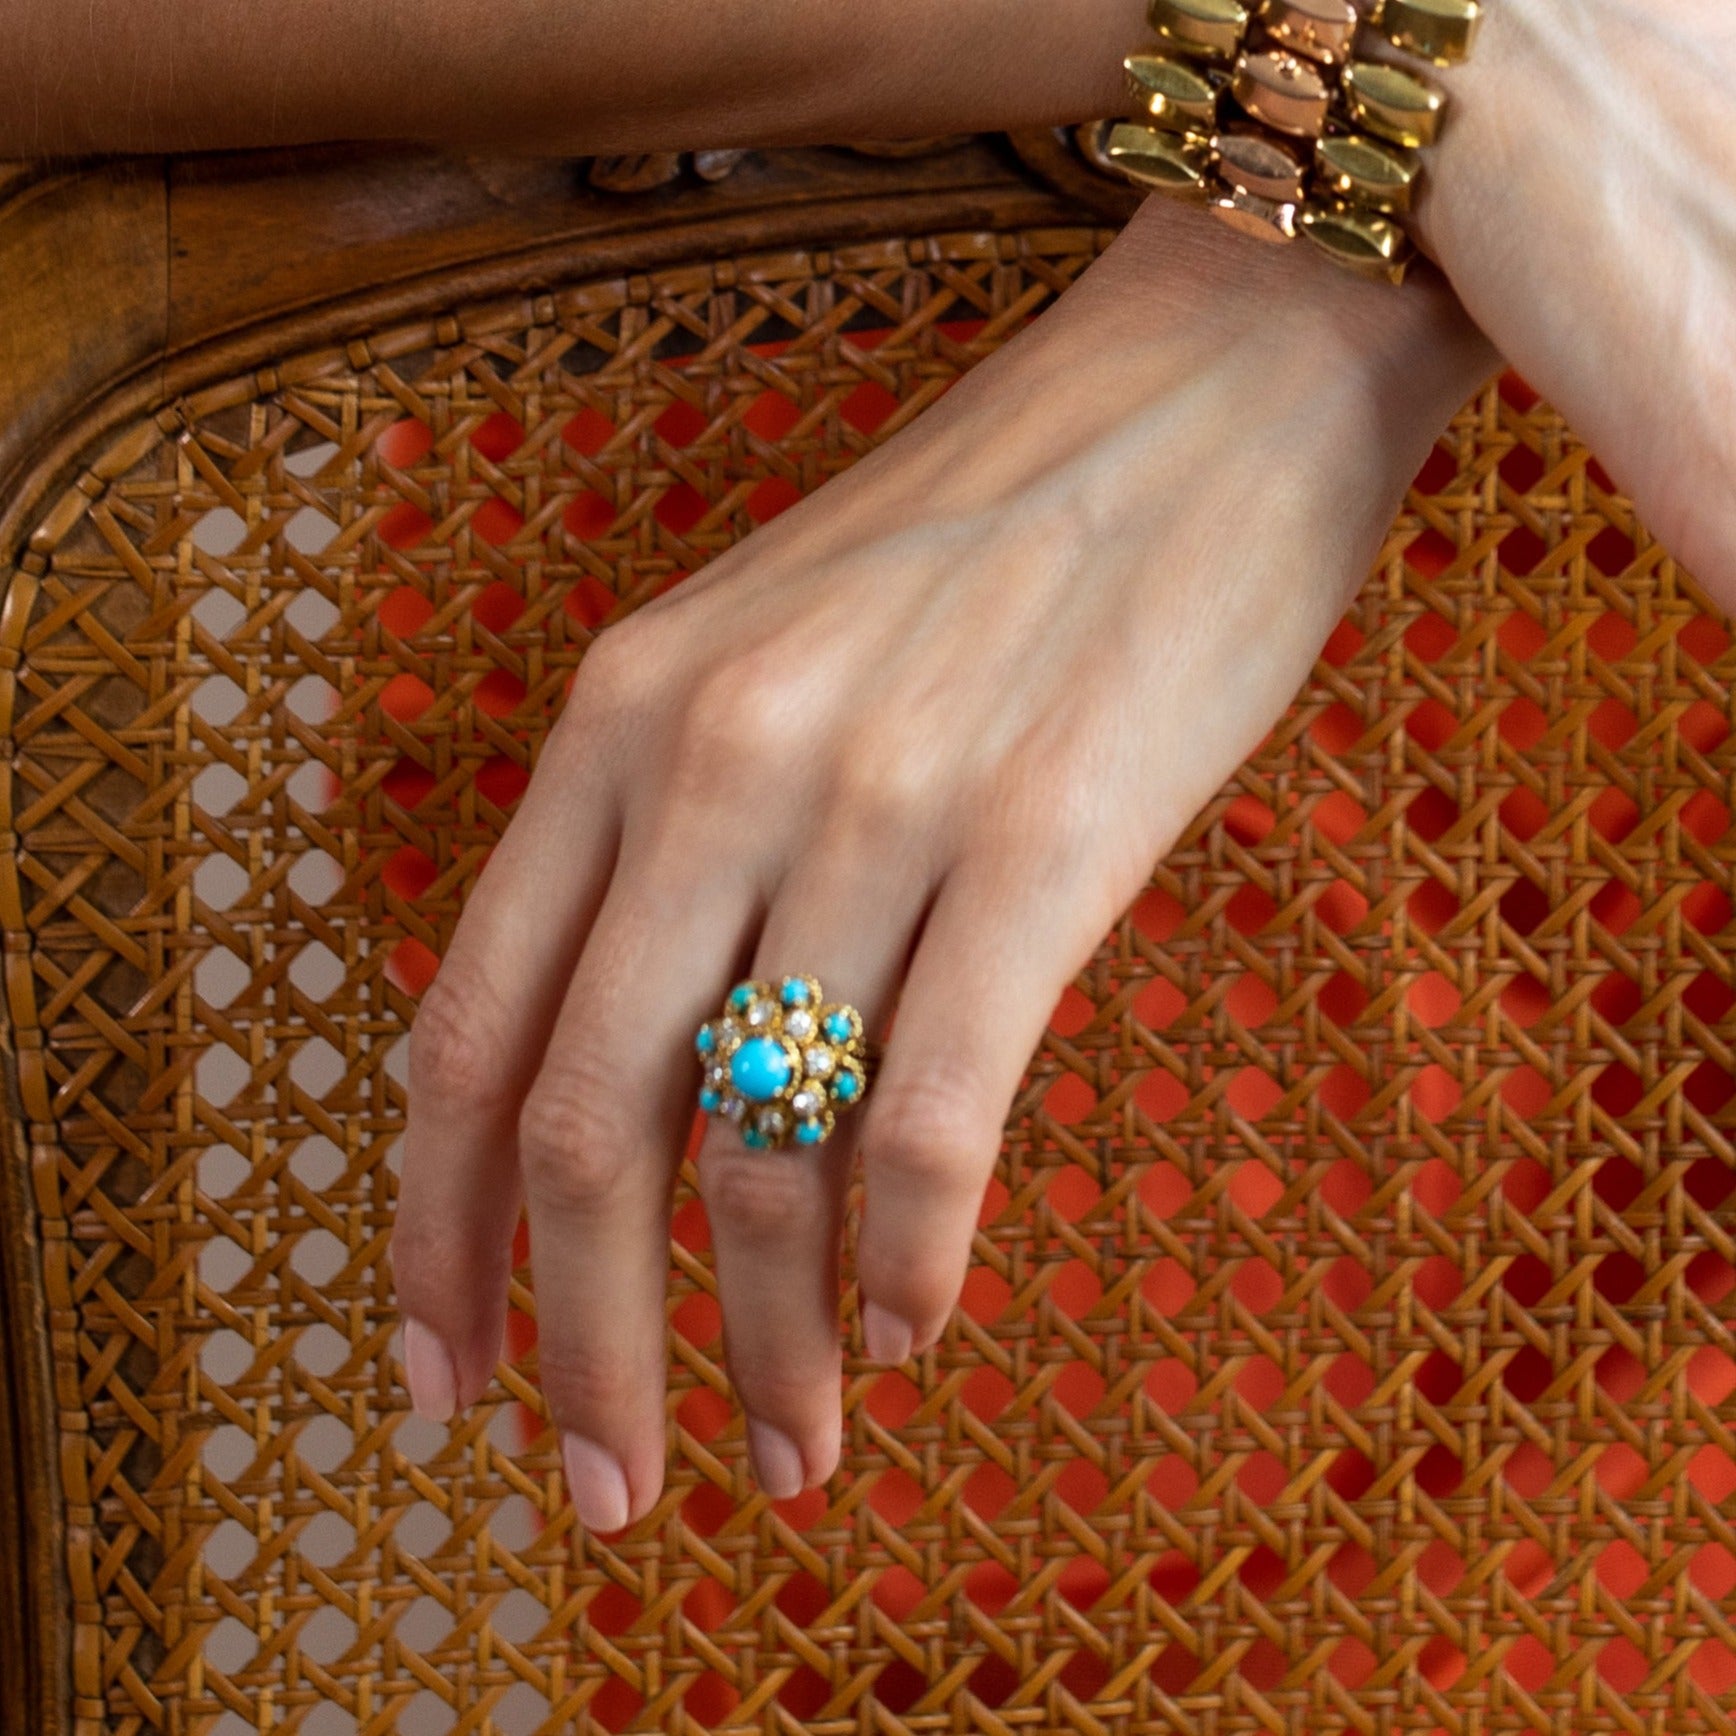 Vintage 1970s turquoise ring worn on woman’s hand. 